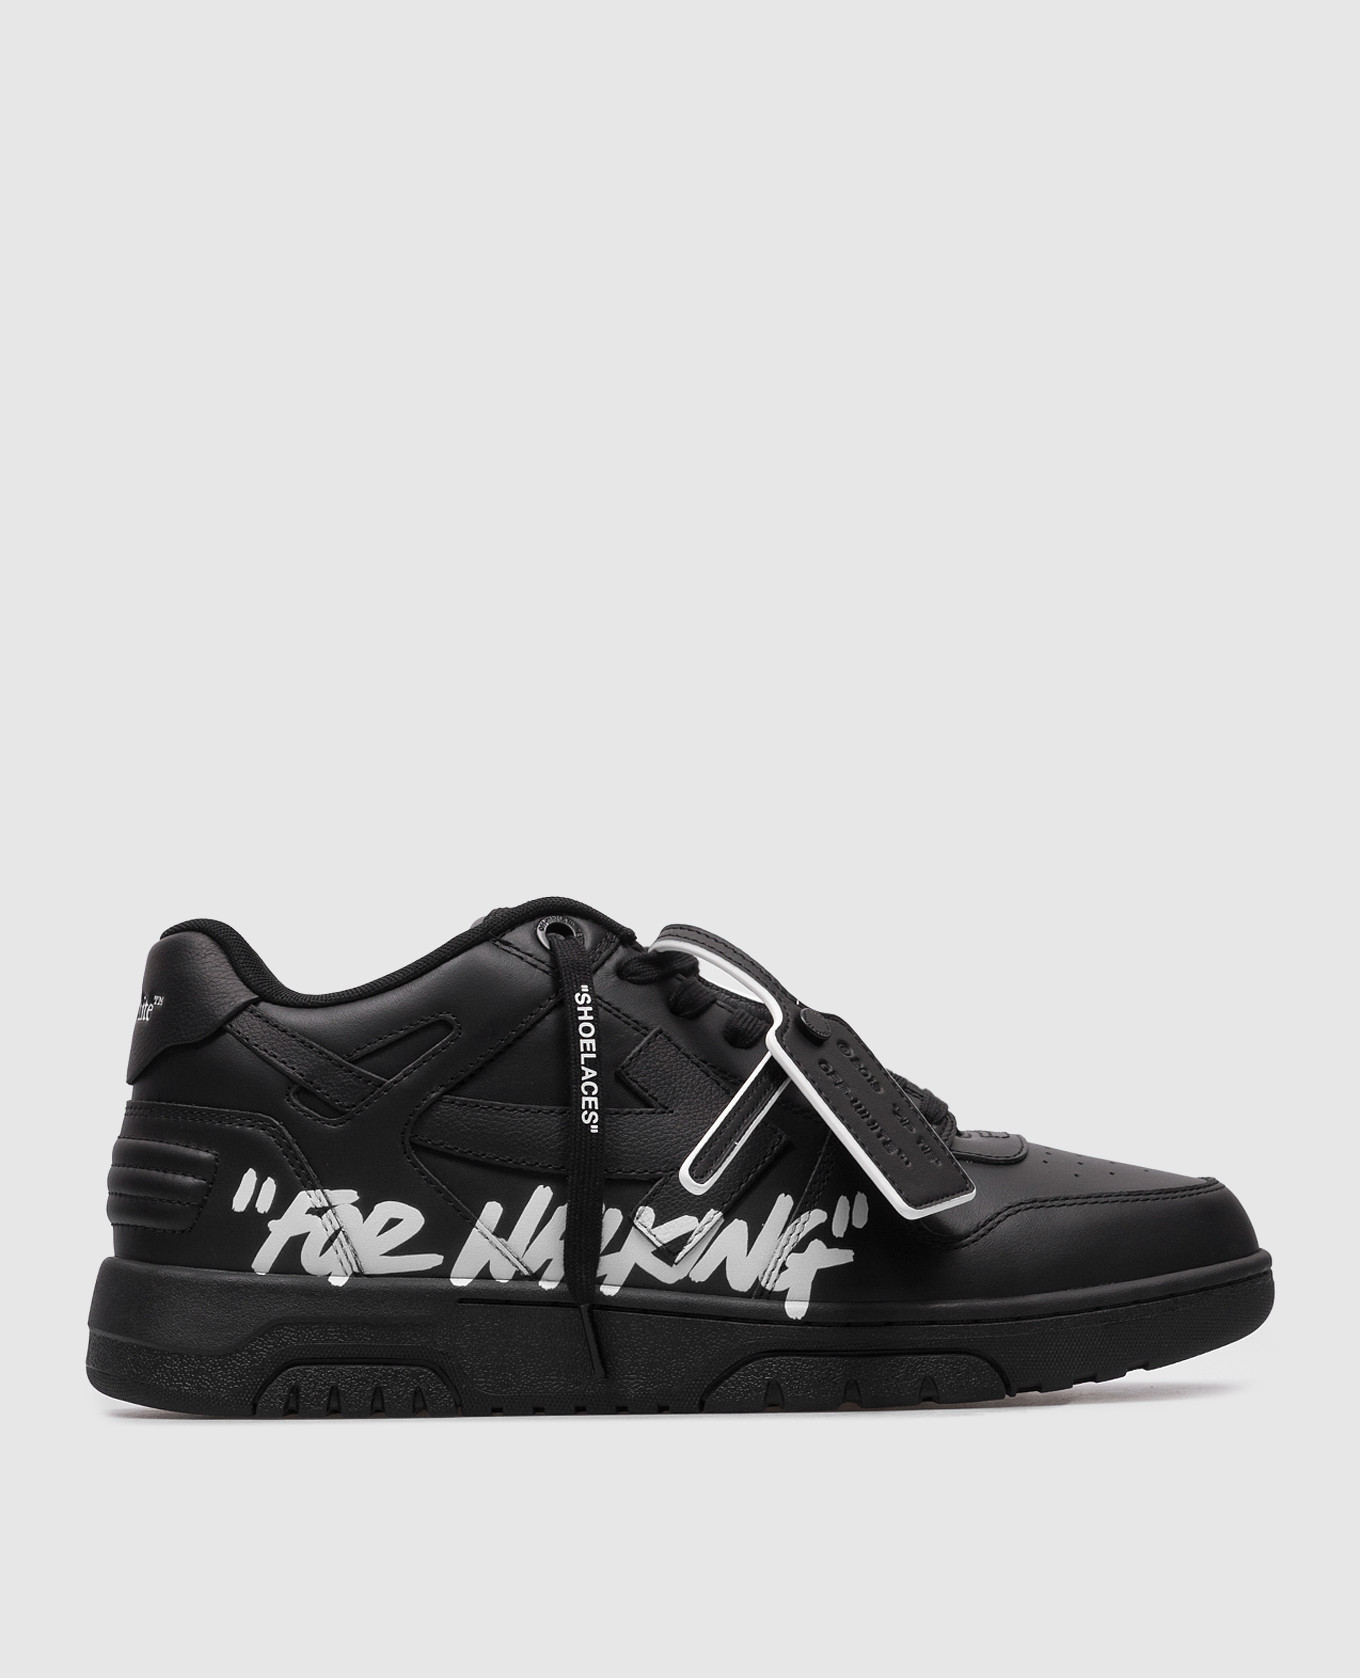 Out Of Office black leather sneakers with contrasting For Walking print